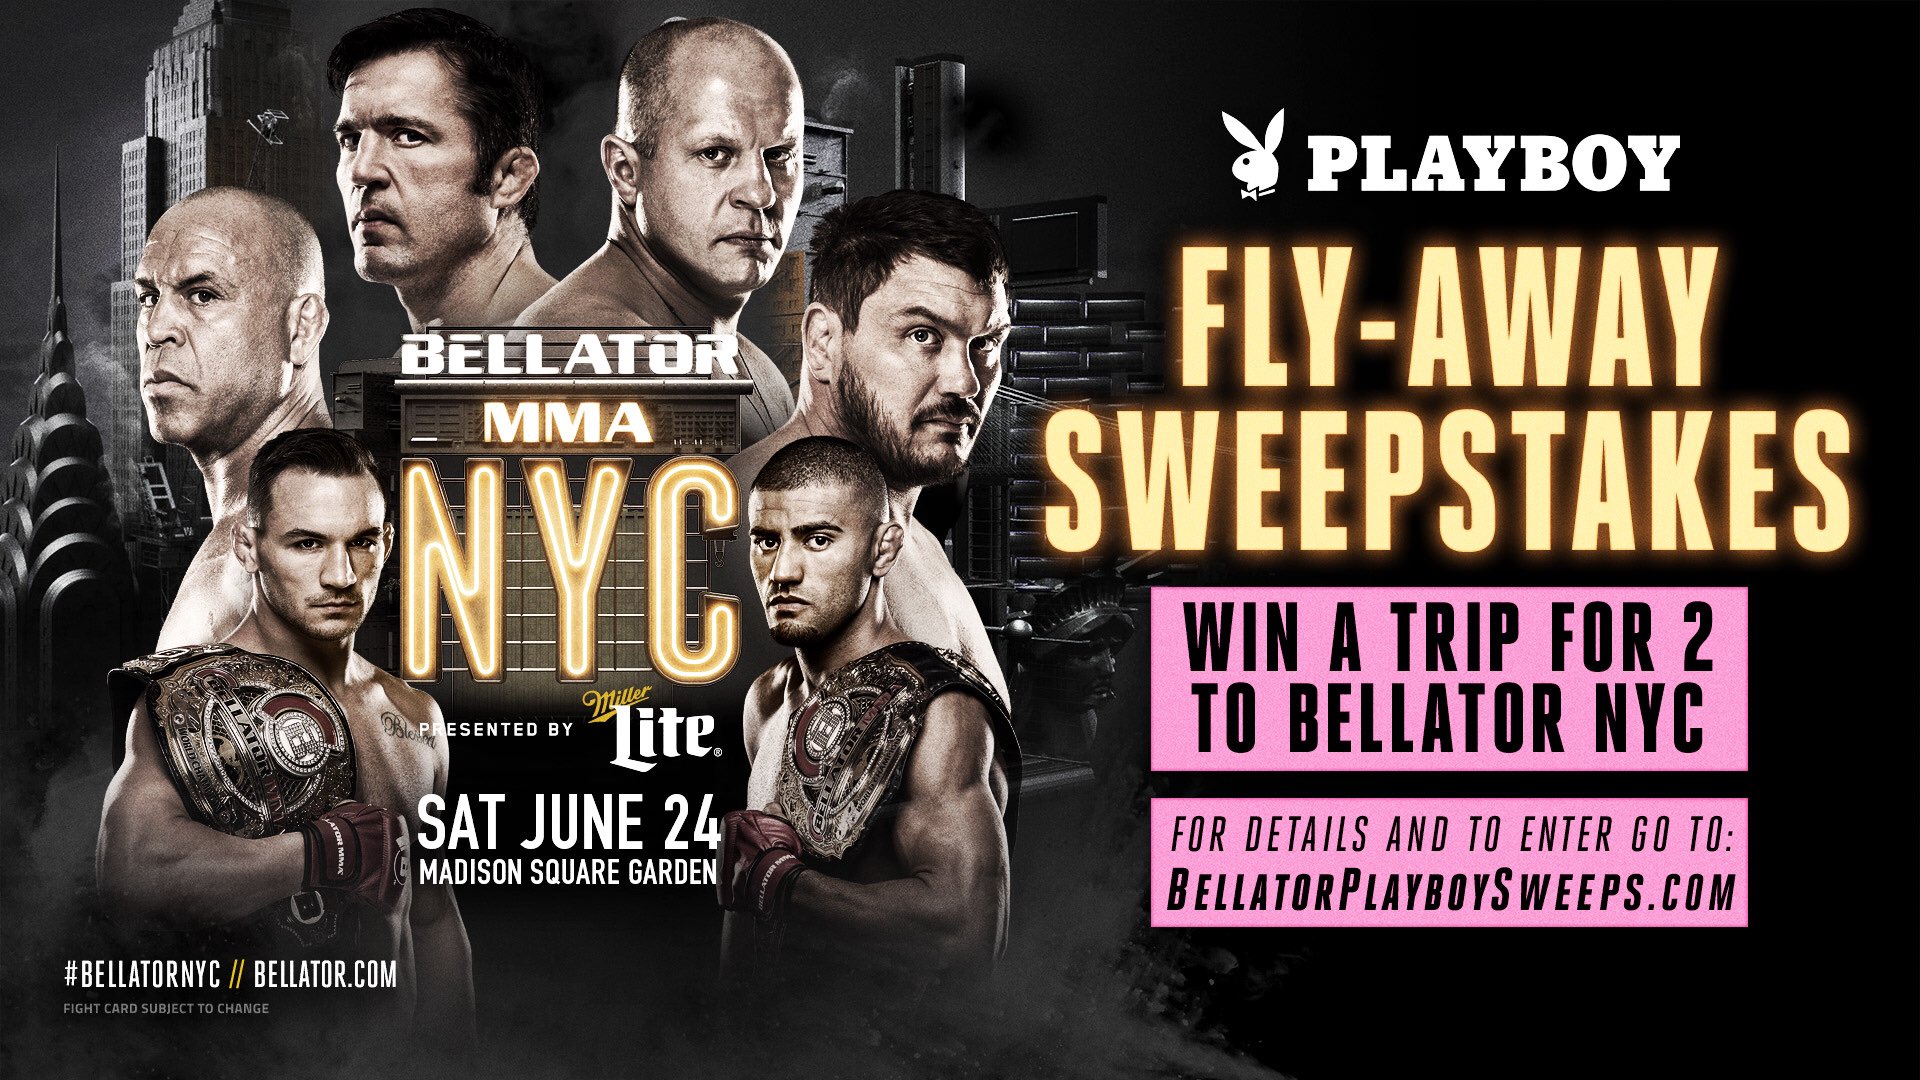 Playboy offering Bellator NYC fly-away sweepstakes